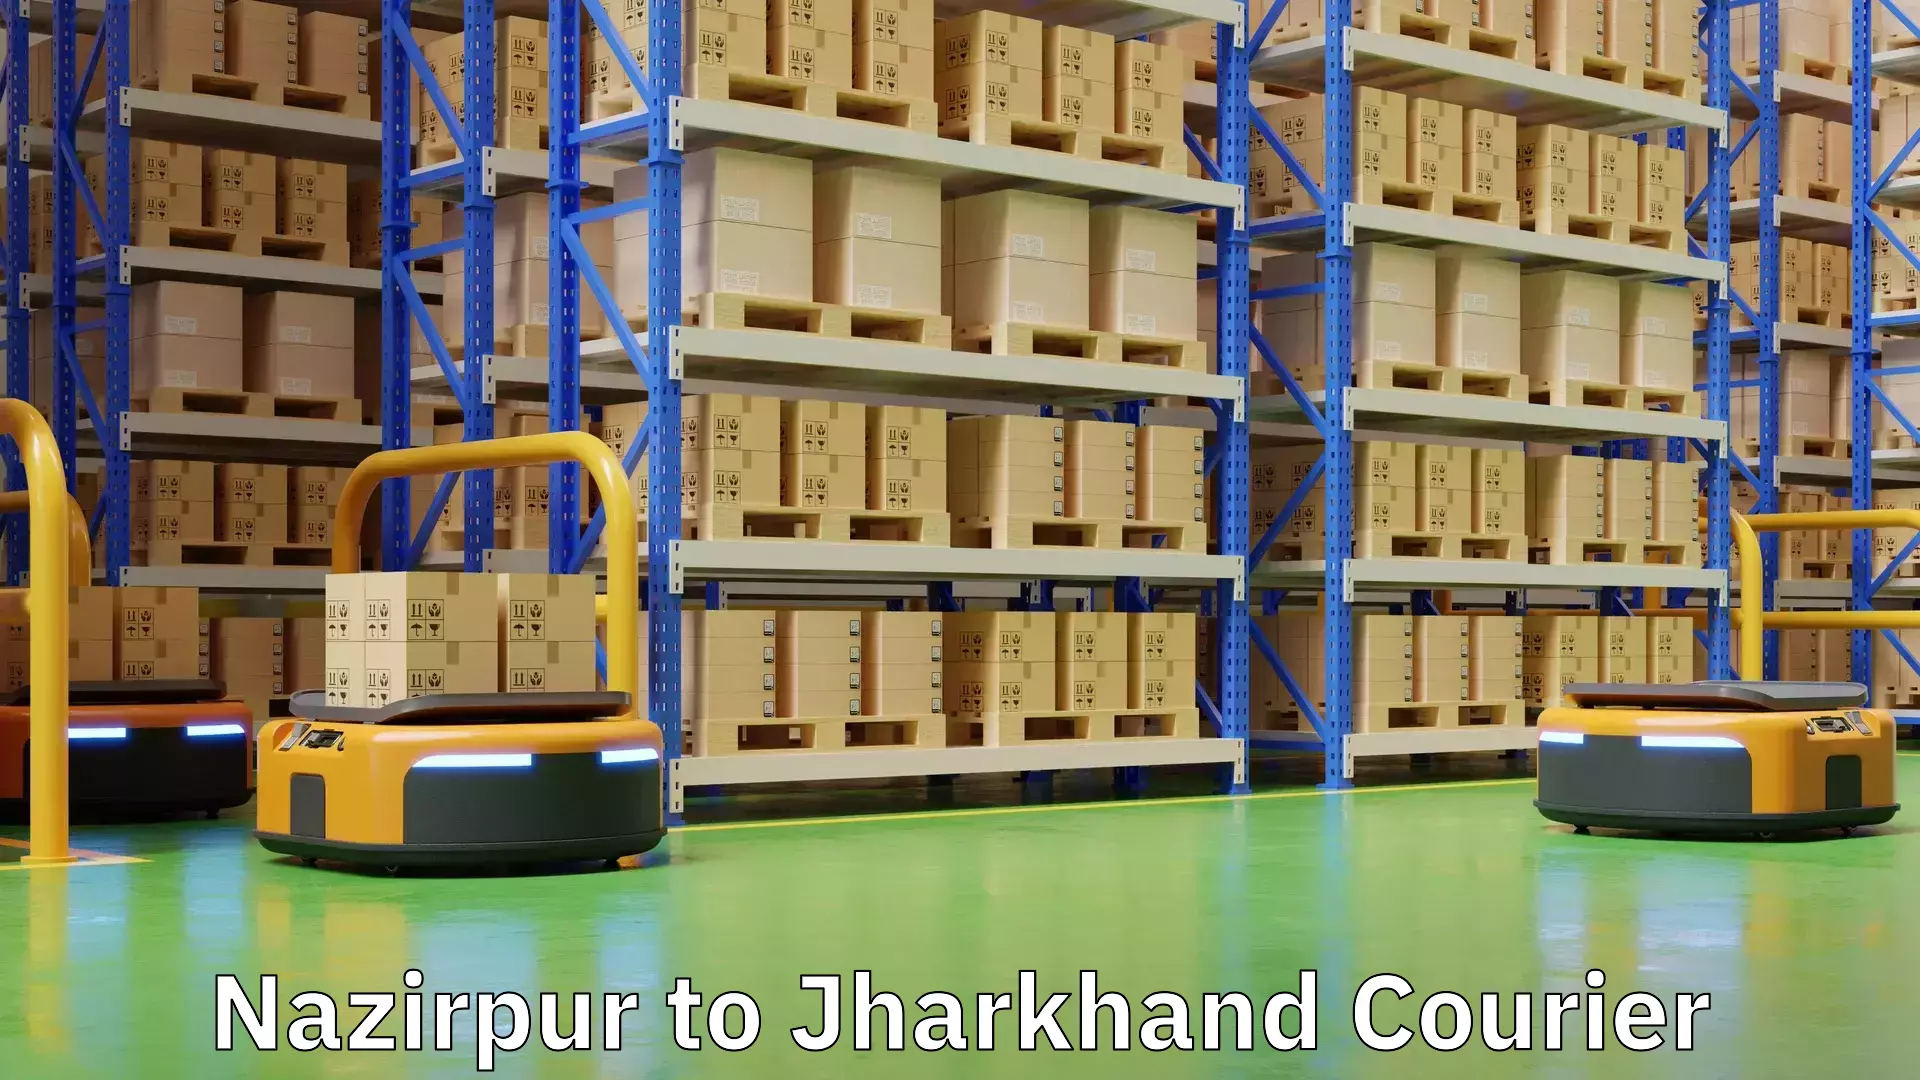 Efficient order fulfillment in Nazirpur to Jharkhand